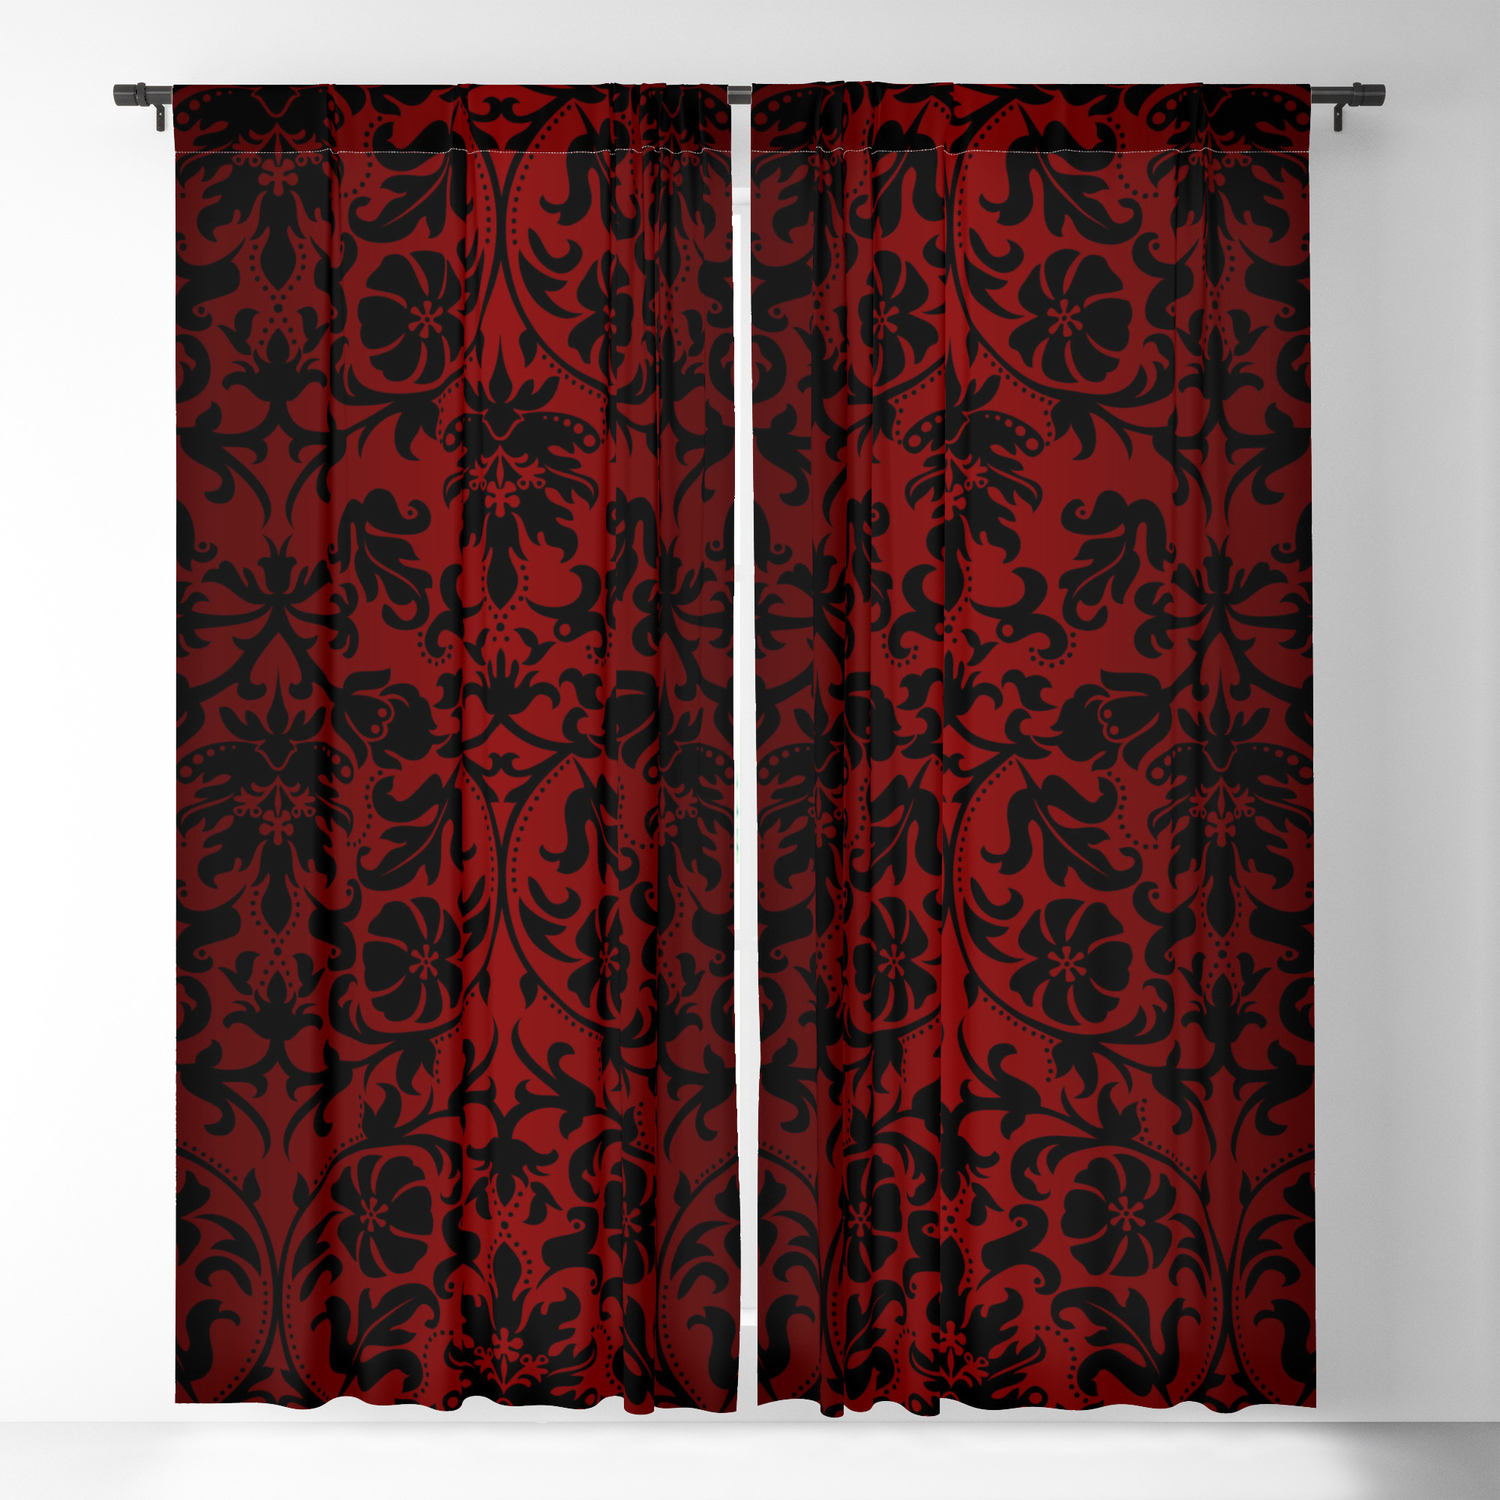 Featured image of post Dark Maroon Curtains - Window blind curtain , transparent red curtains decor , red stage curtain illustration png clipart.